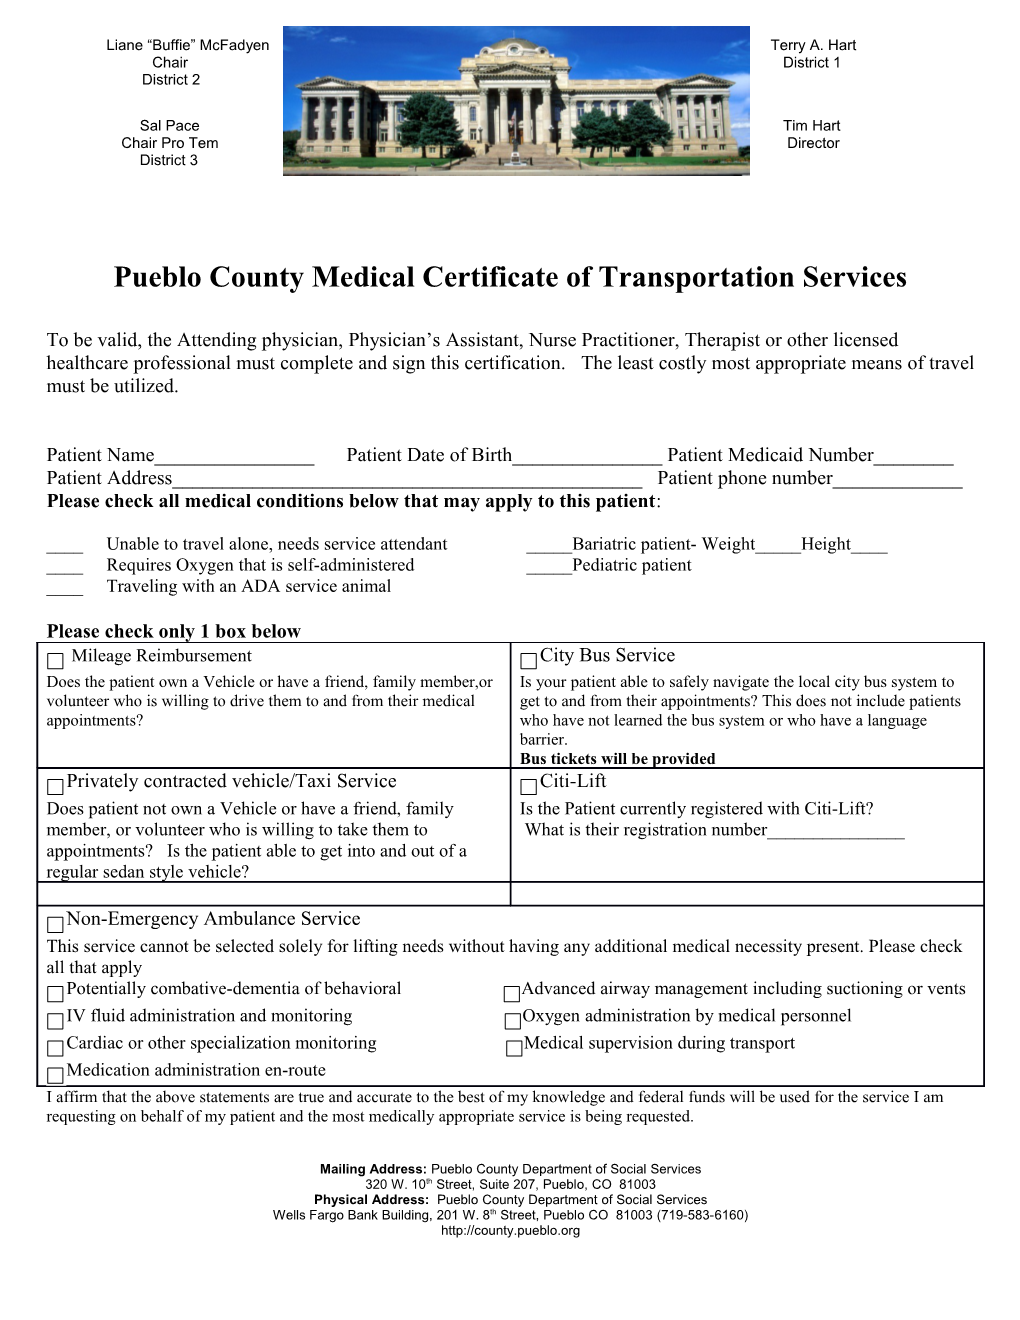 Pueblo County Medical Certificate of Transportation Services